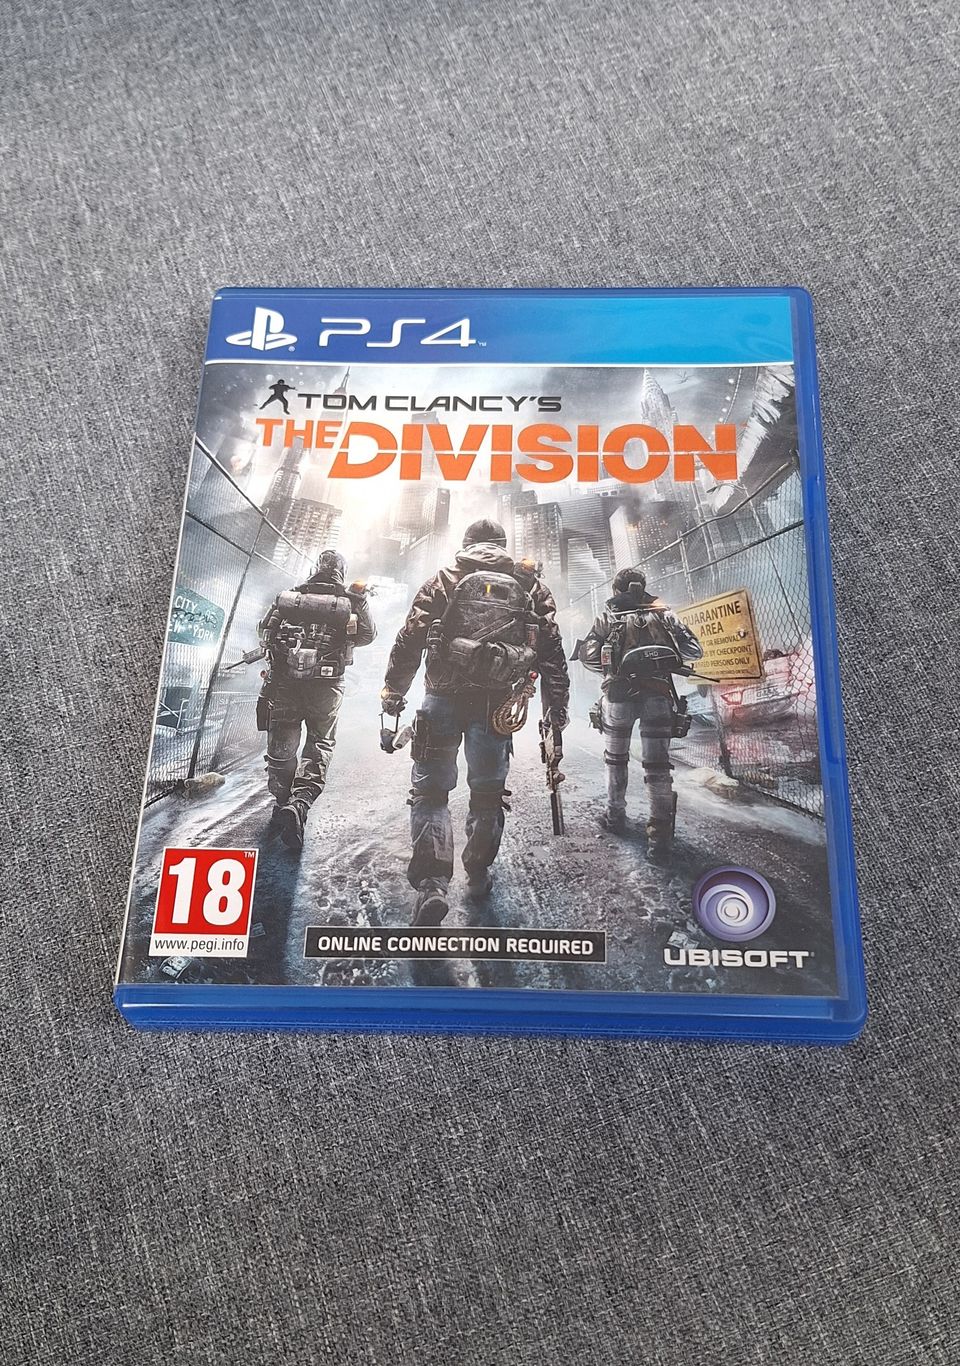 The Division, Playstation 4